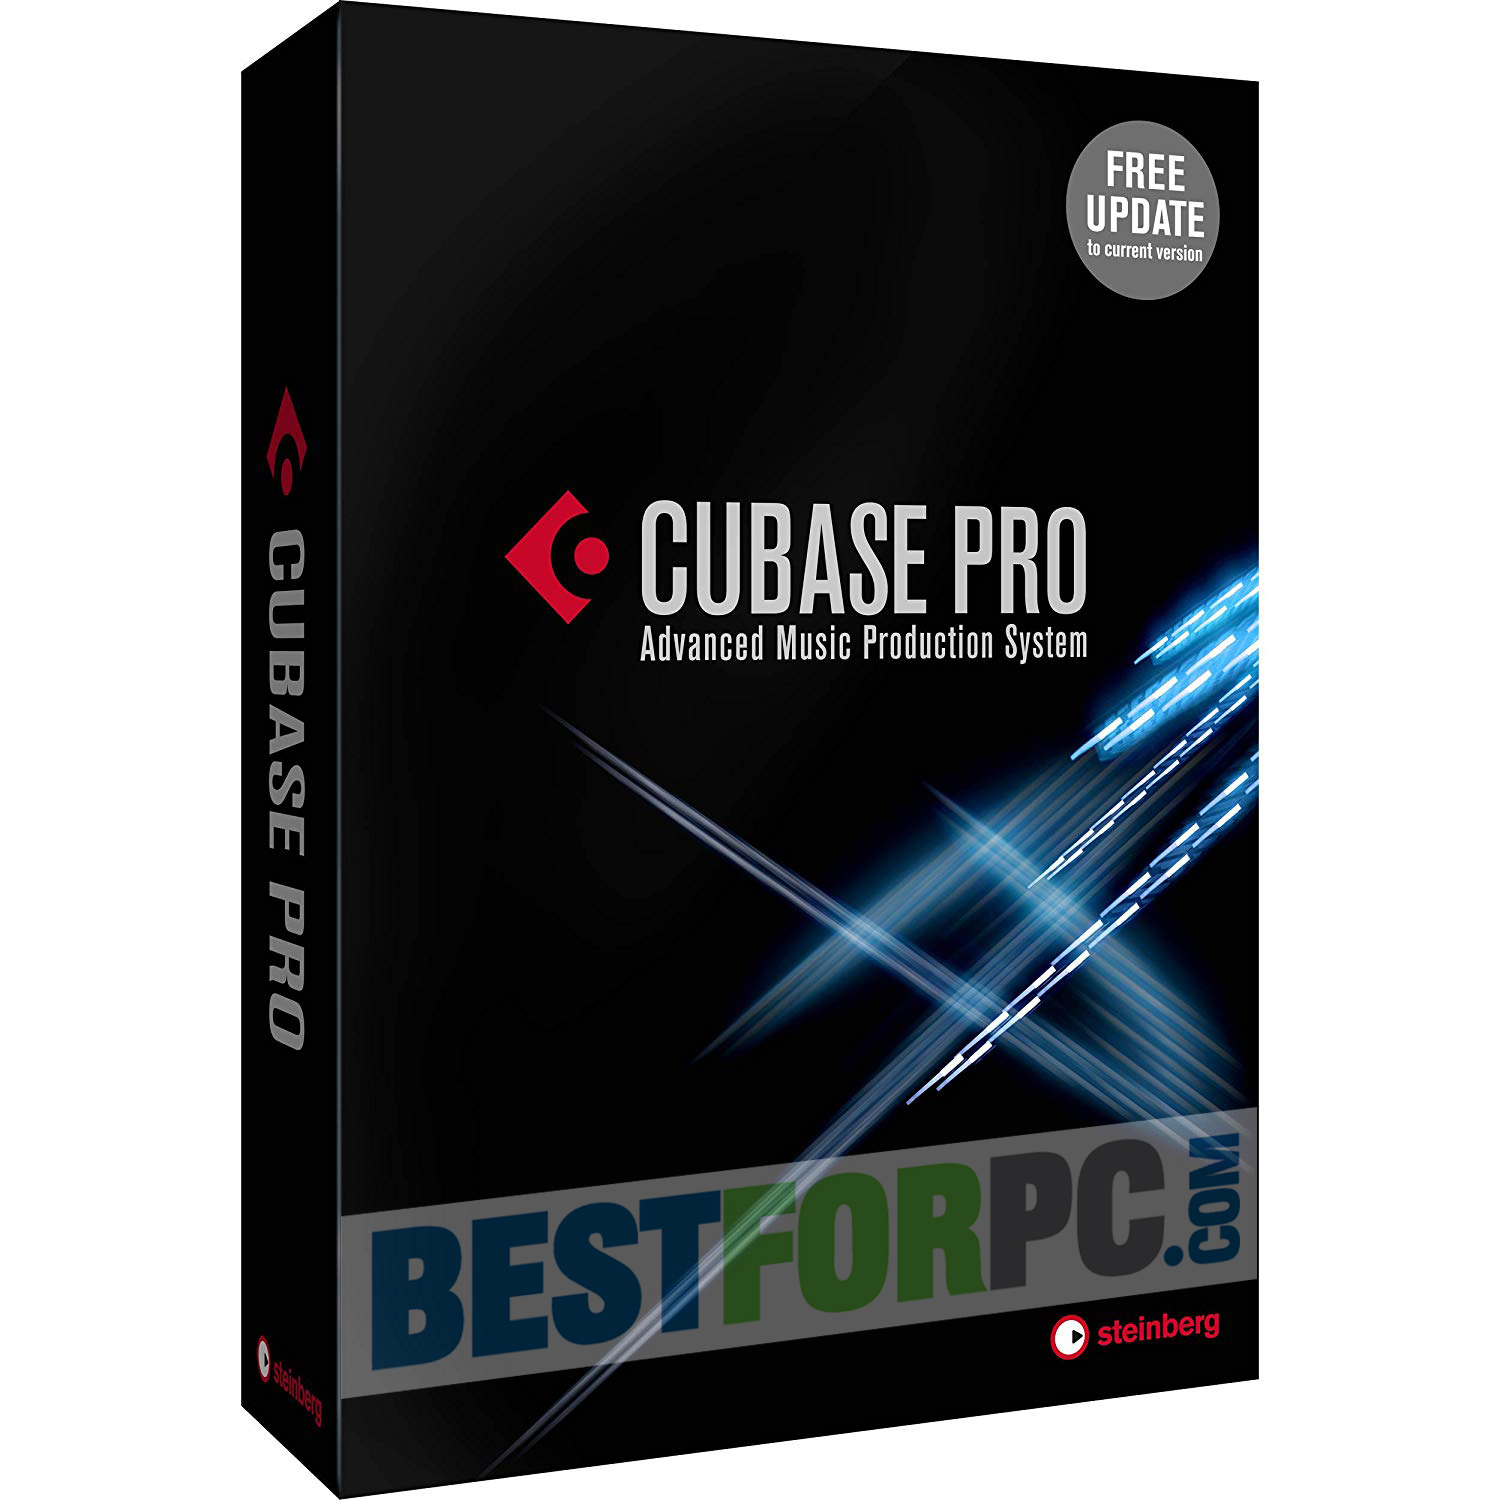 Cubase 9.5 Pro Full Version Free Download for Windows 11, 10, 8, 7 x64